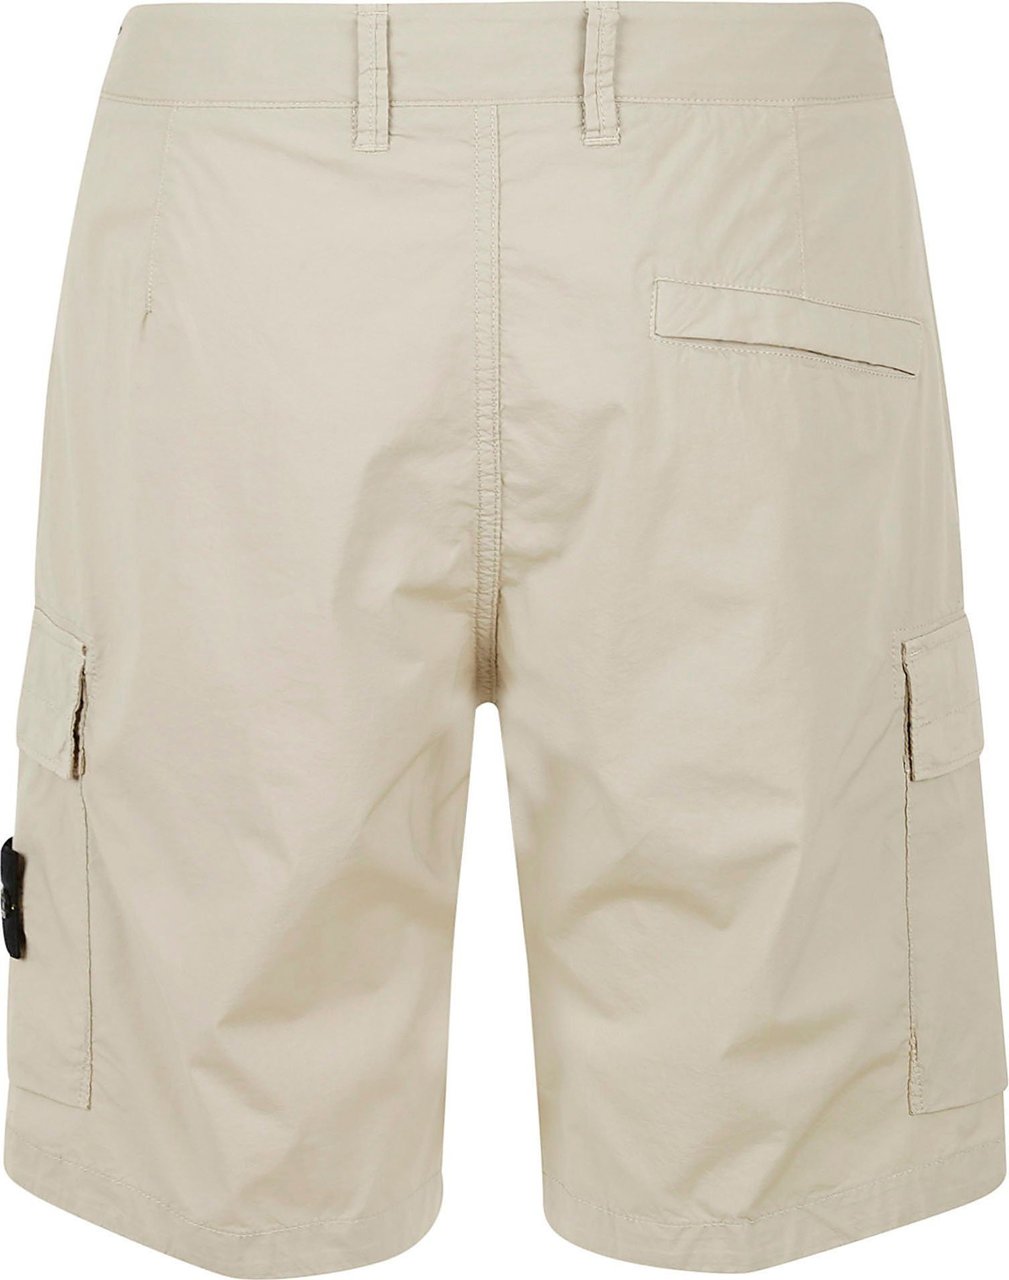 Stone Island Shorts Divers Divers